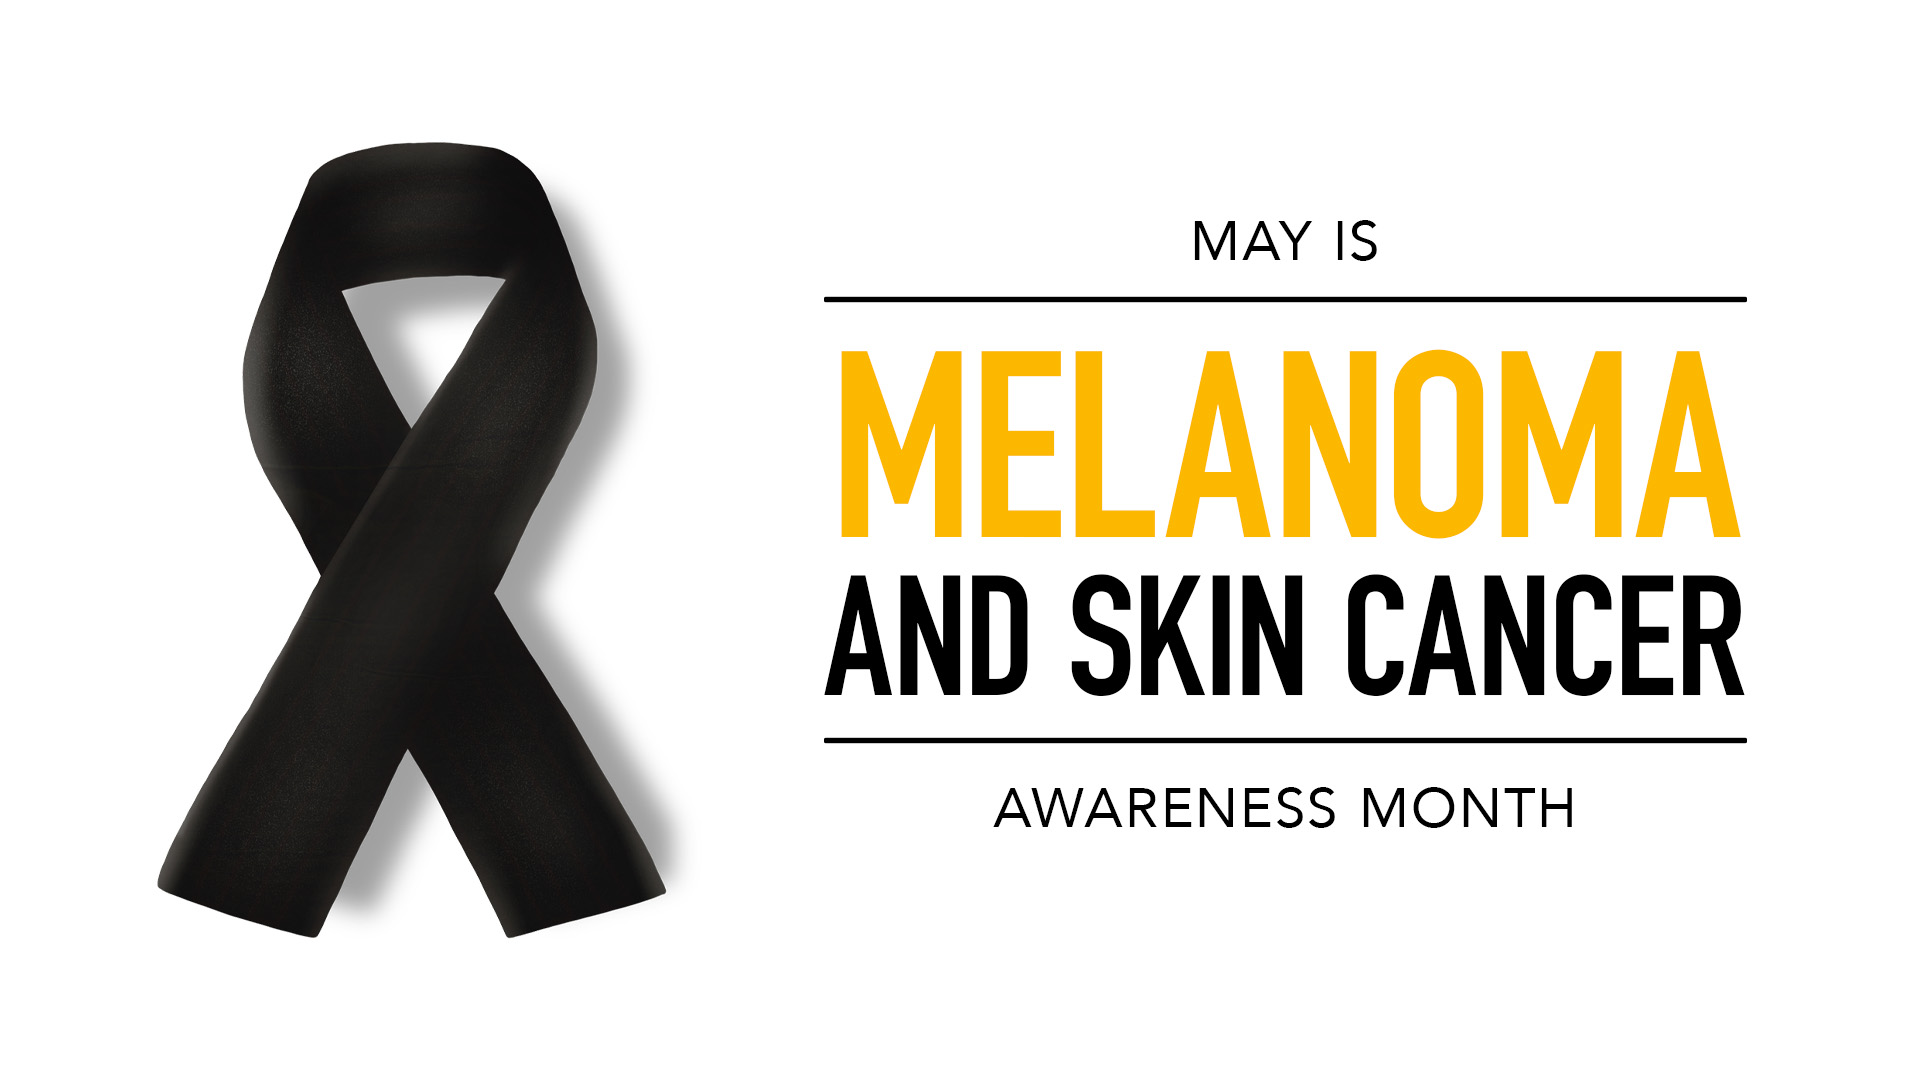 On the left side of the screen there is a black ribbon folded in the shape of a cancer ribbon. on the right of the black shadowed ribbon it reads May is Melanoma and Skin Cancer Awareness Month.